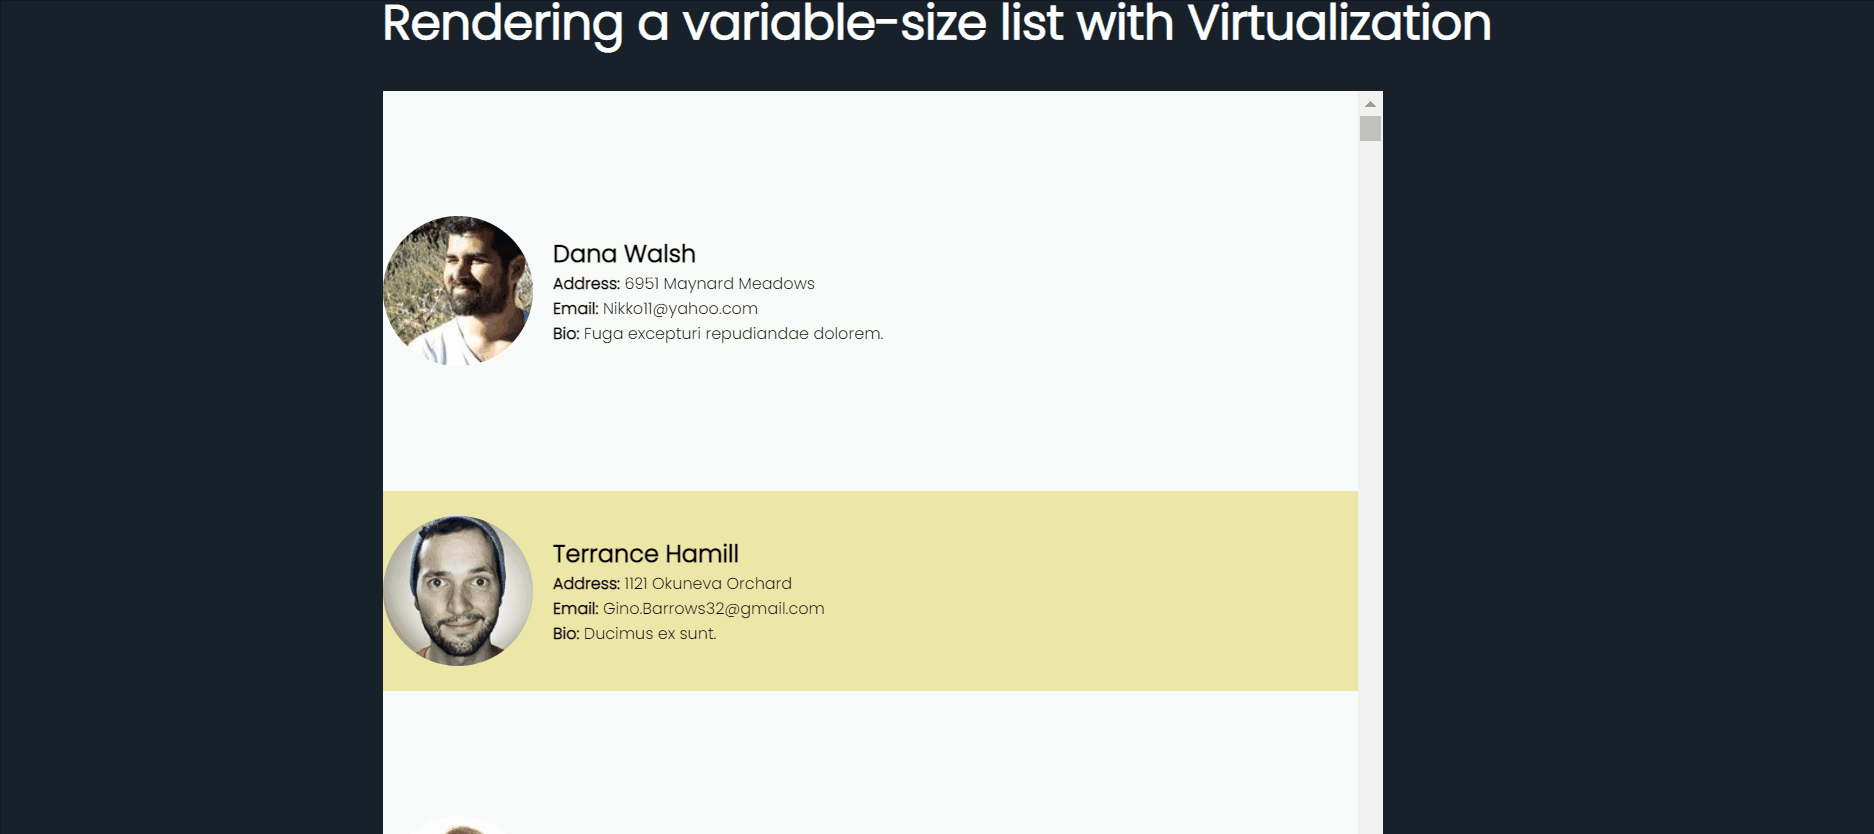 Rendering a variable-size list with virtualization